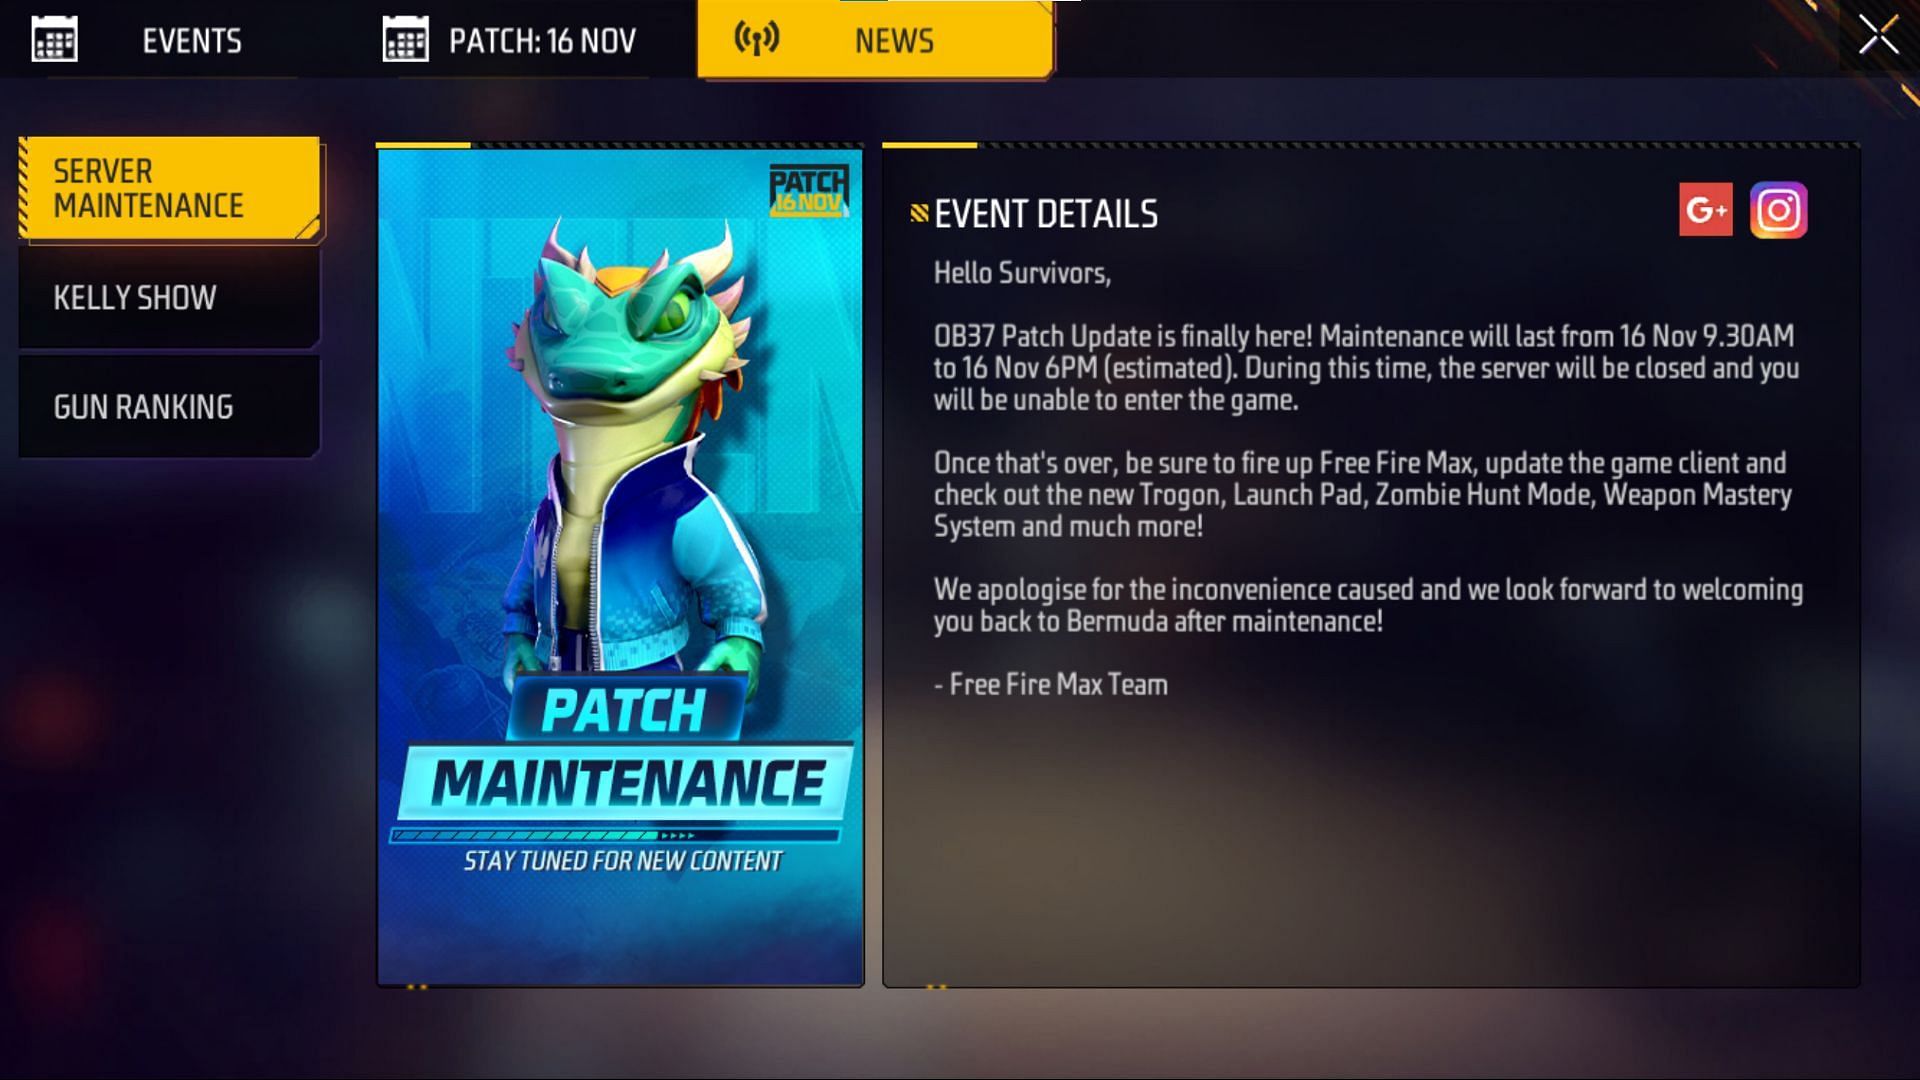 Timings for the maintenance have been revealed in the news section (Image via Garena)